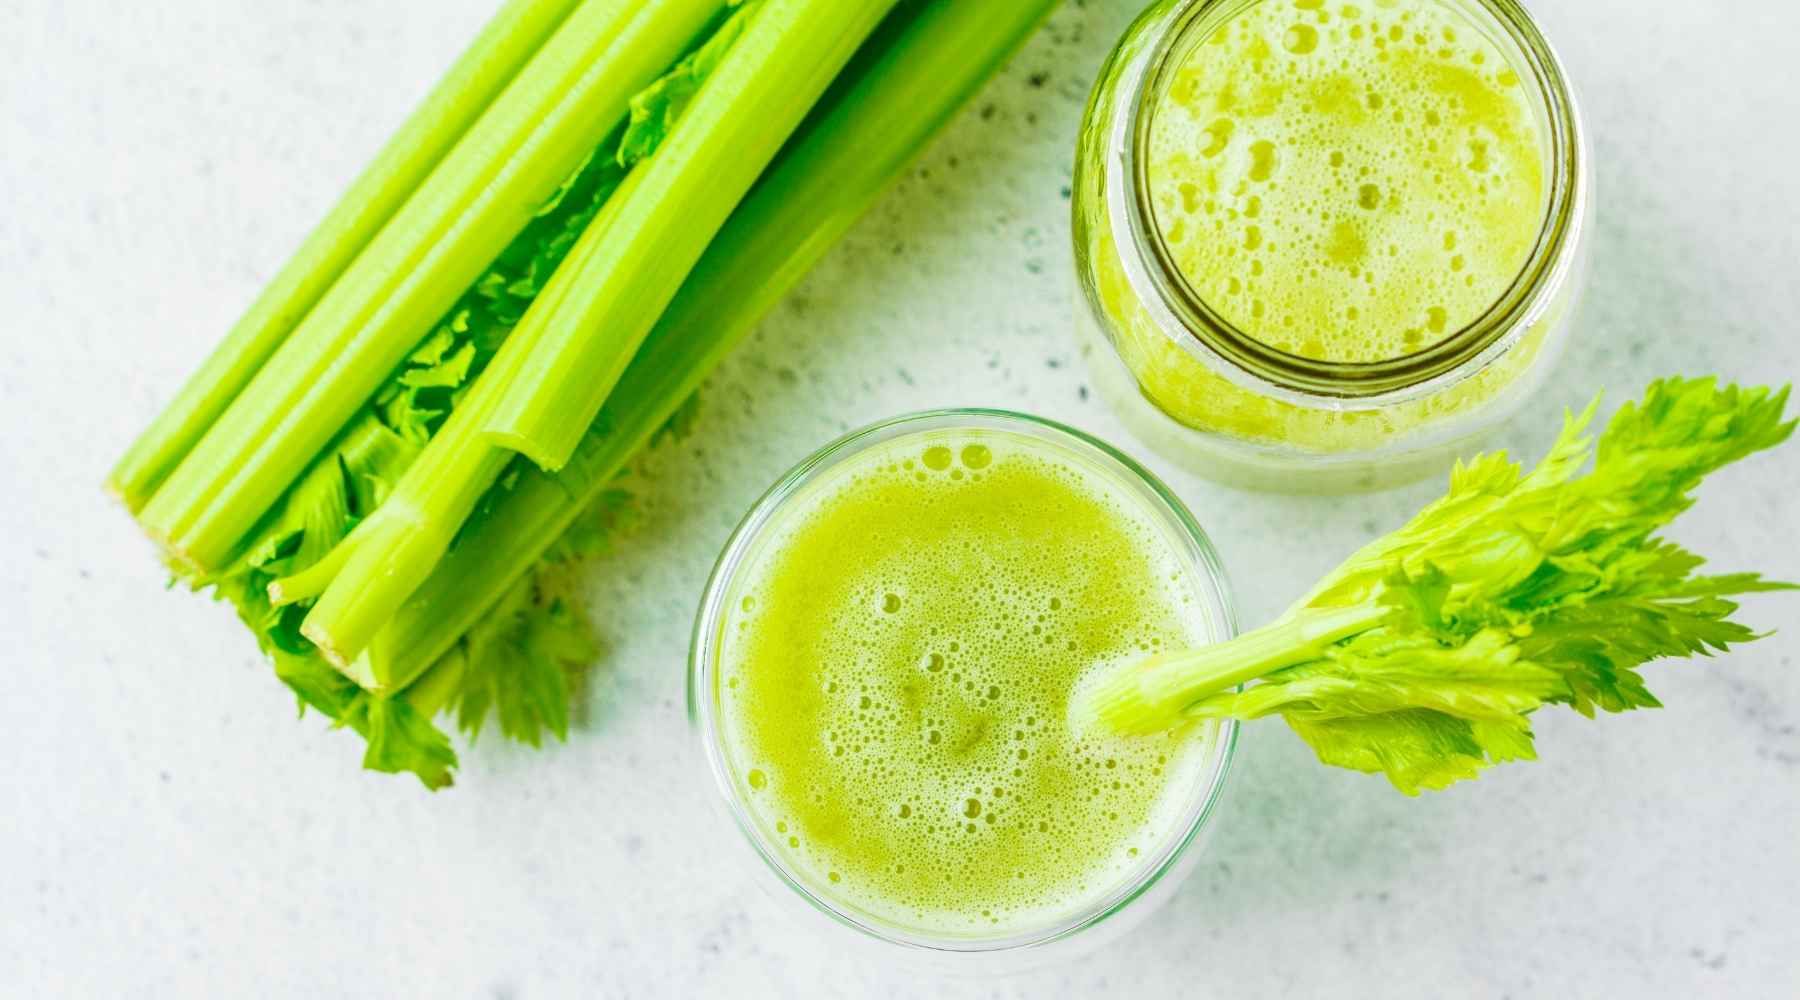 Best_Time_To_Drink_Celery_Juice_For_Maximum_Health_Benefits.jpg